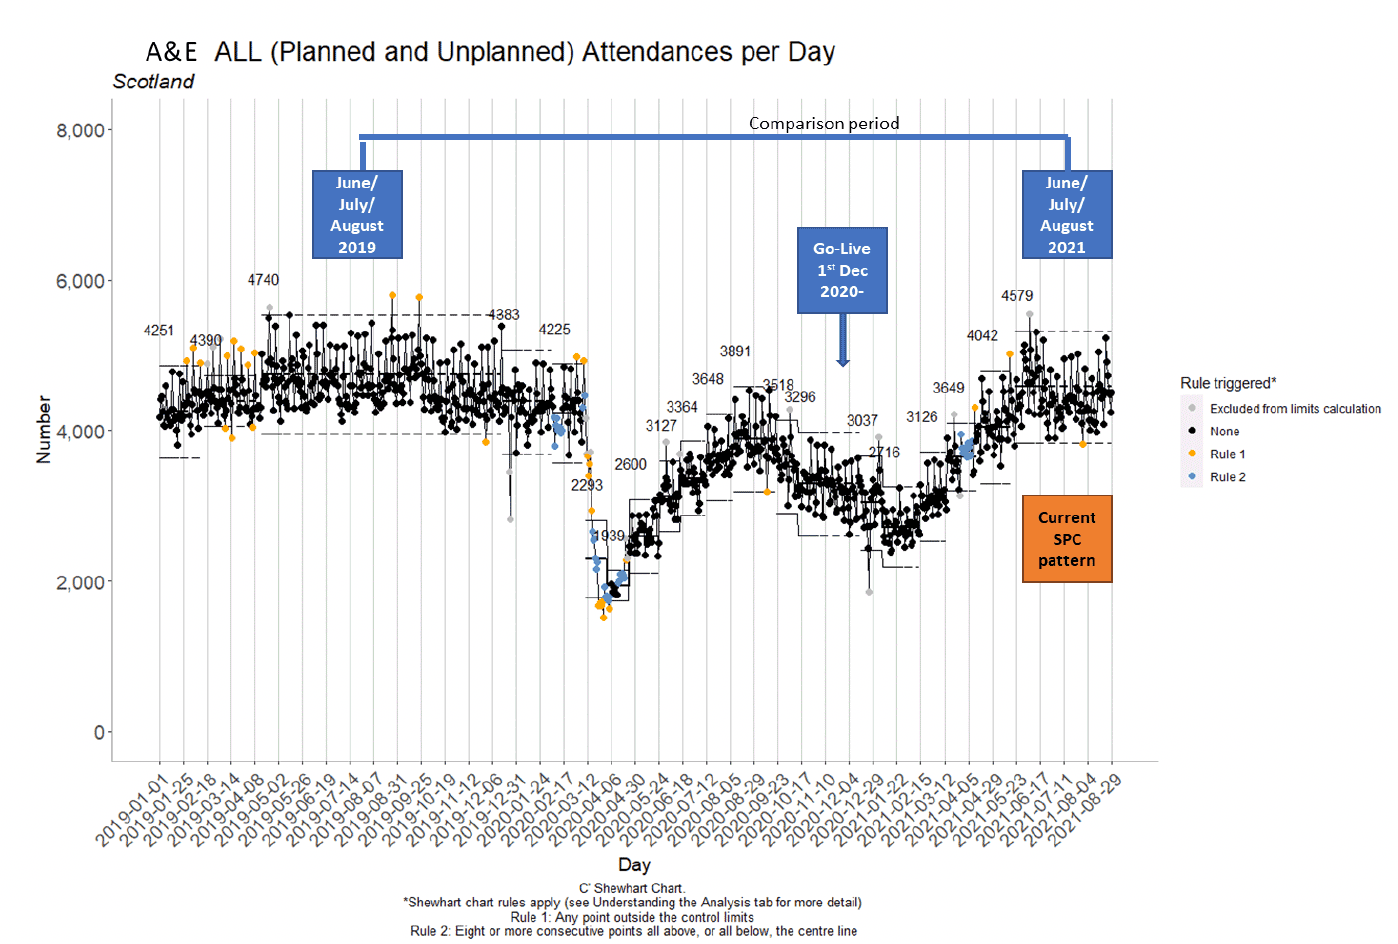 Statistical Process Control (SPC) charts, as recommended by NHS Scotland and NHS Improvement, are used as the main analytic approach to highlight process change and patterns. This diagram shows All ED/MIU attendances from beginning of January 2019 to end of August 2021 for Scotland. The blue boxes highlight the two comparison periods Jun - Aug 2019 and Jun - Aug 2021, as well as the Go-Live date of 1st December 2020 for the Redesign Urgent Care Programme. The orange box shows the time period looked at to assess the current SPC pattern. 